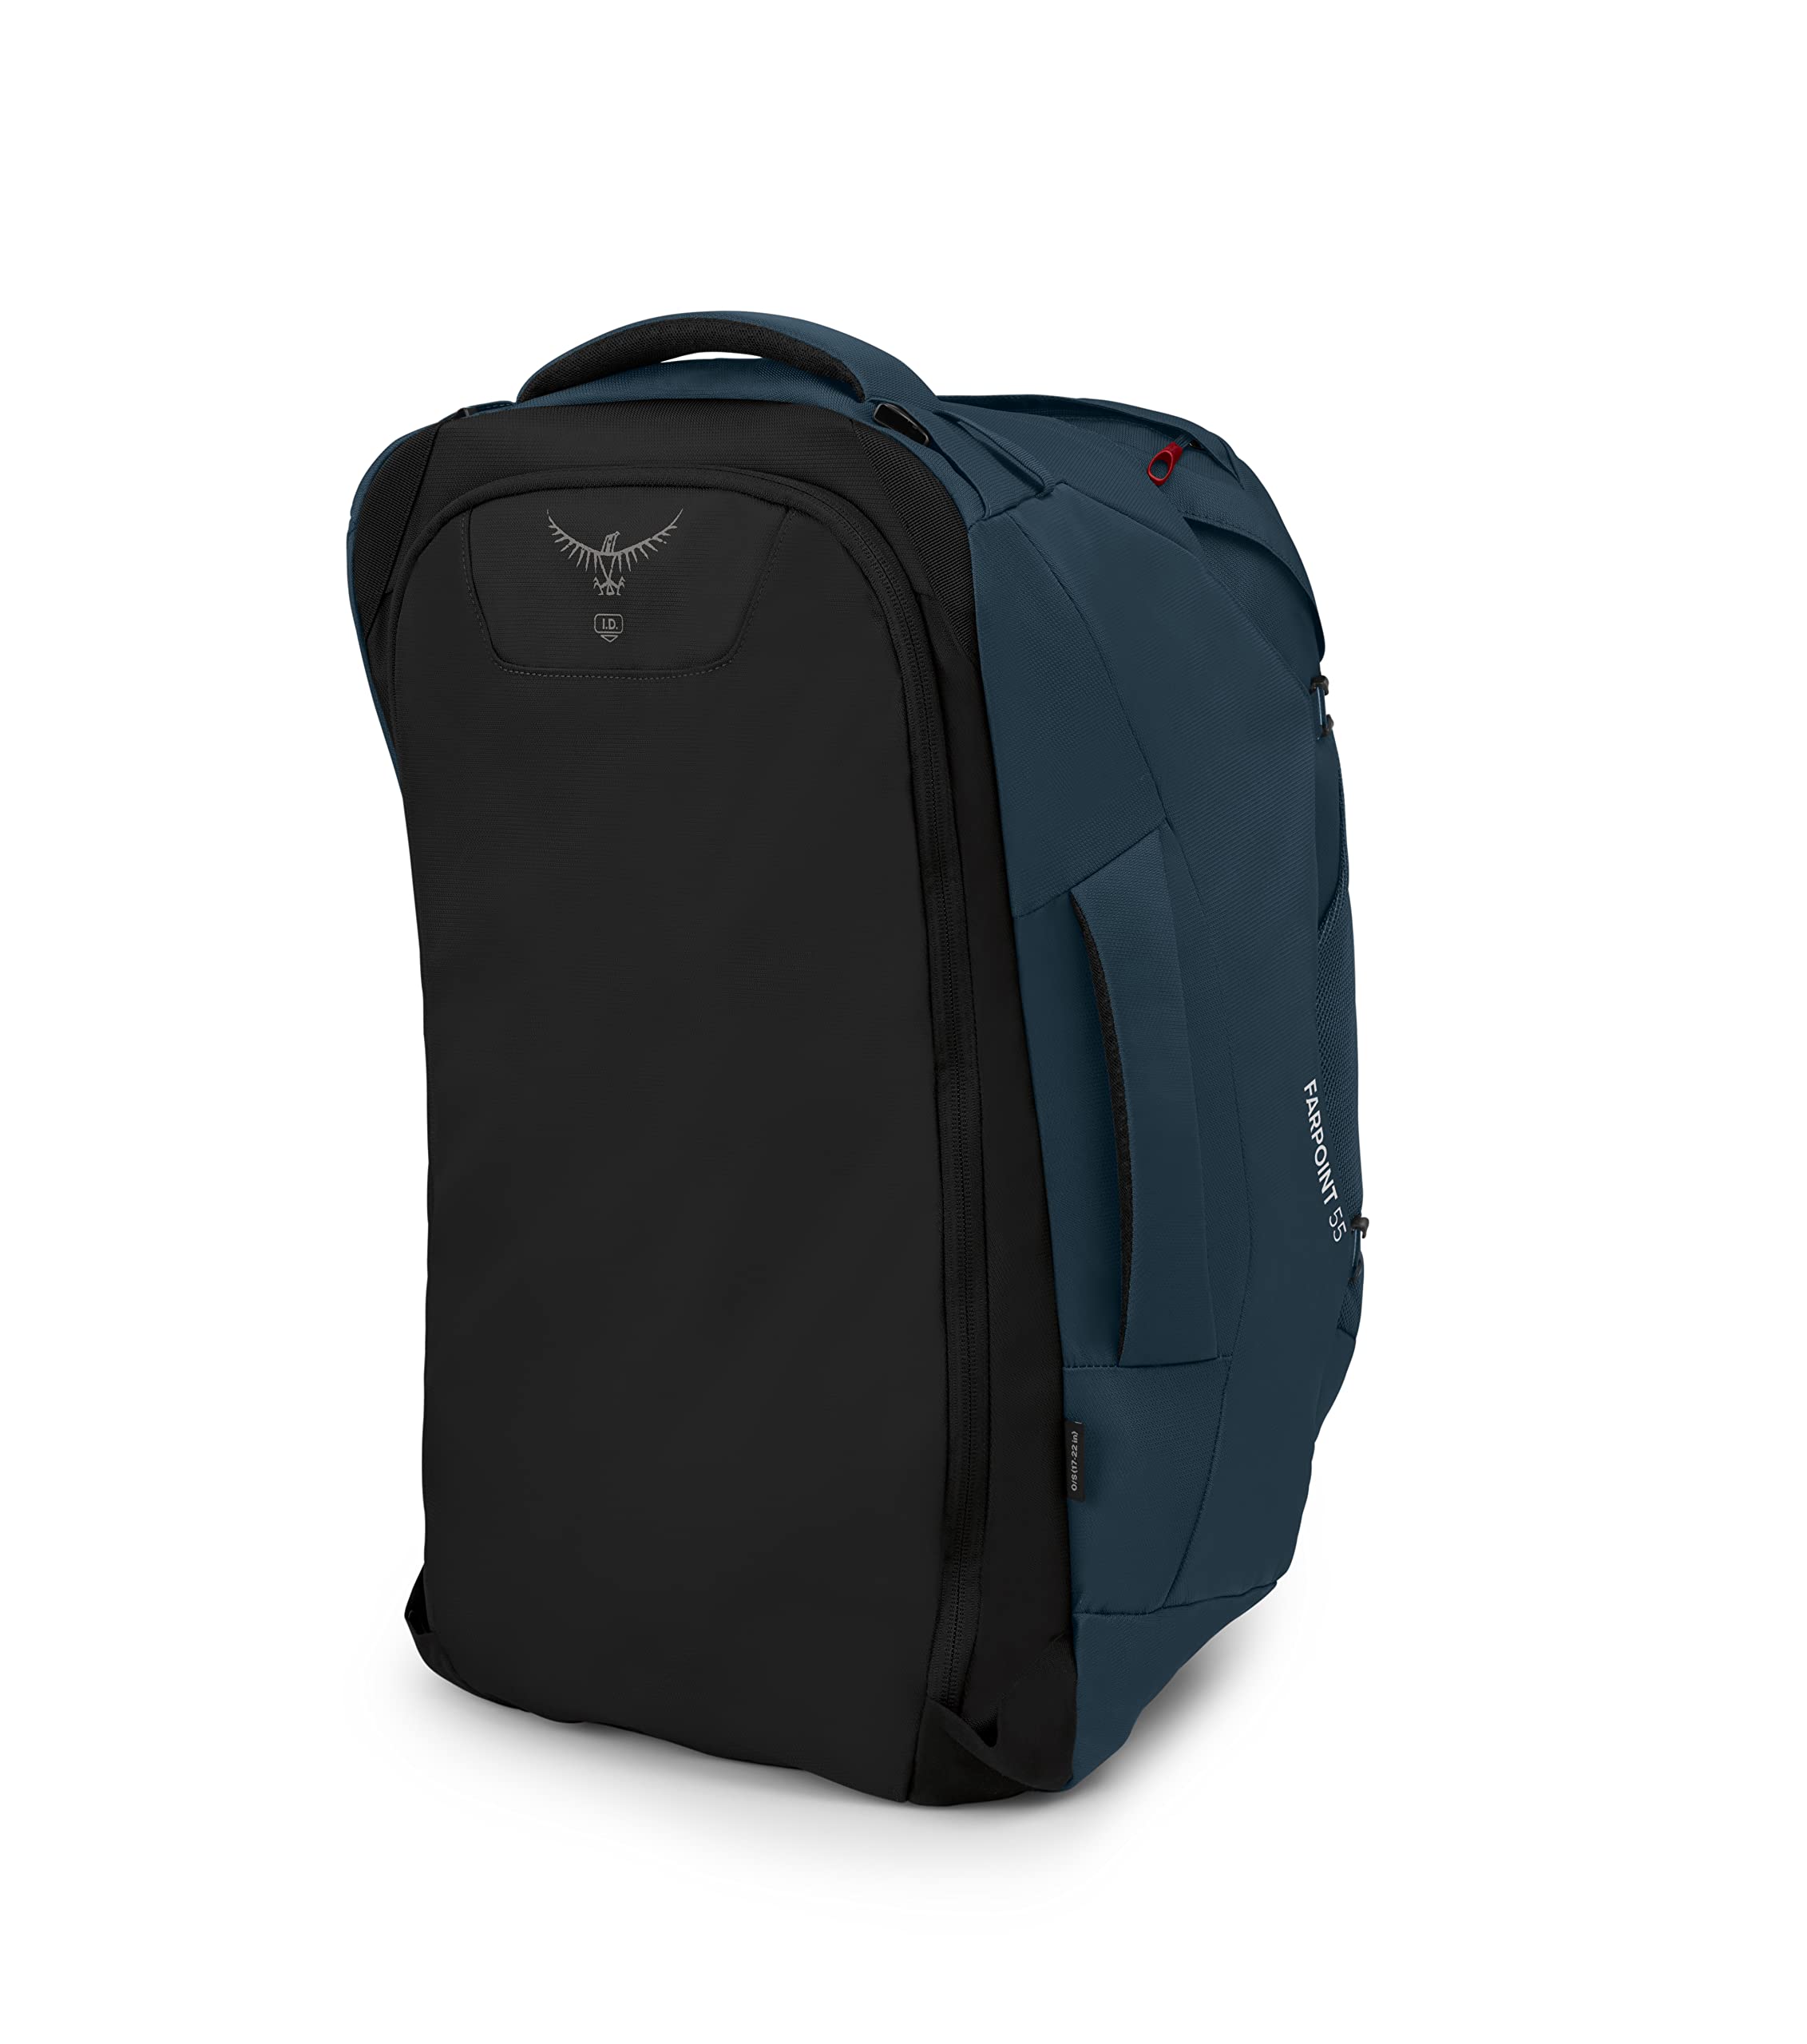 Osprey Farpoint 55 Men's Travel Backpack, Muted Space Blue